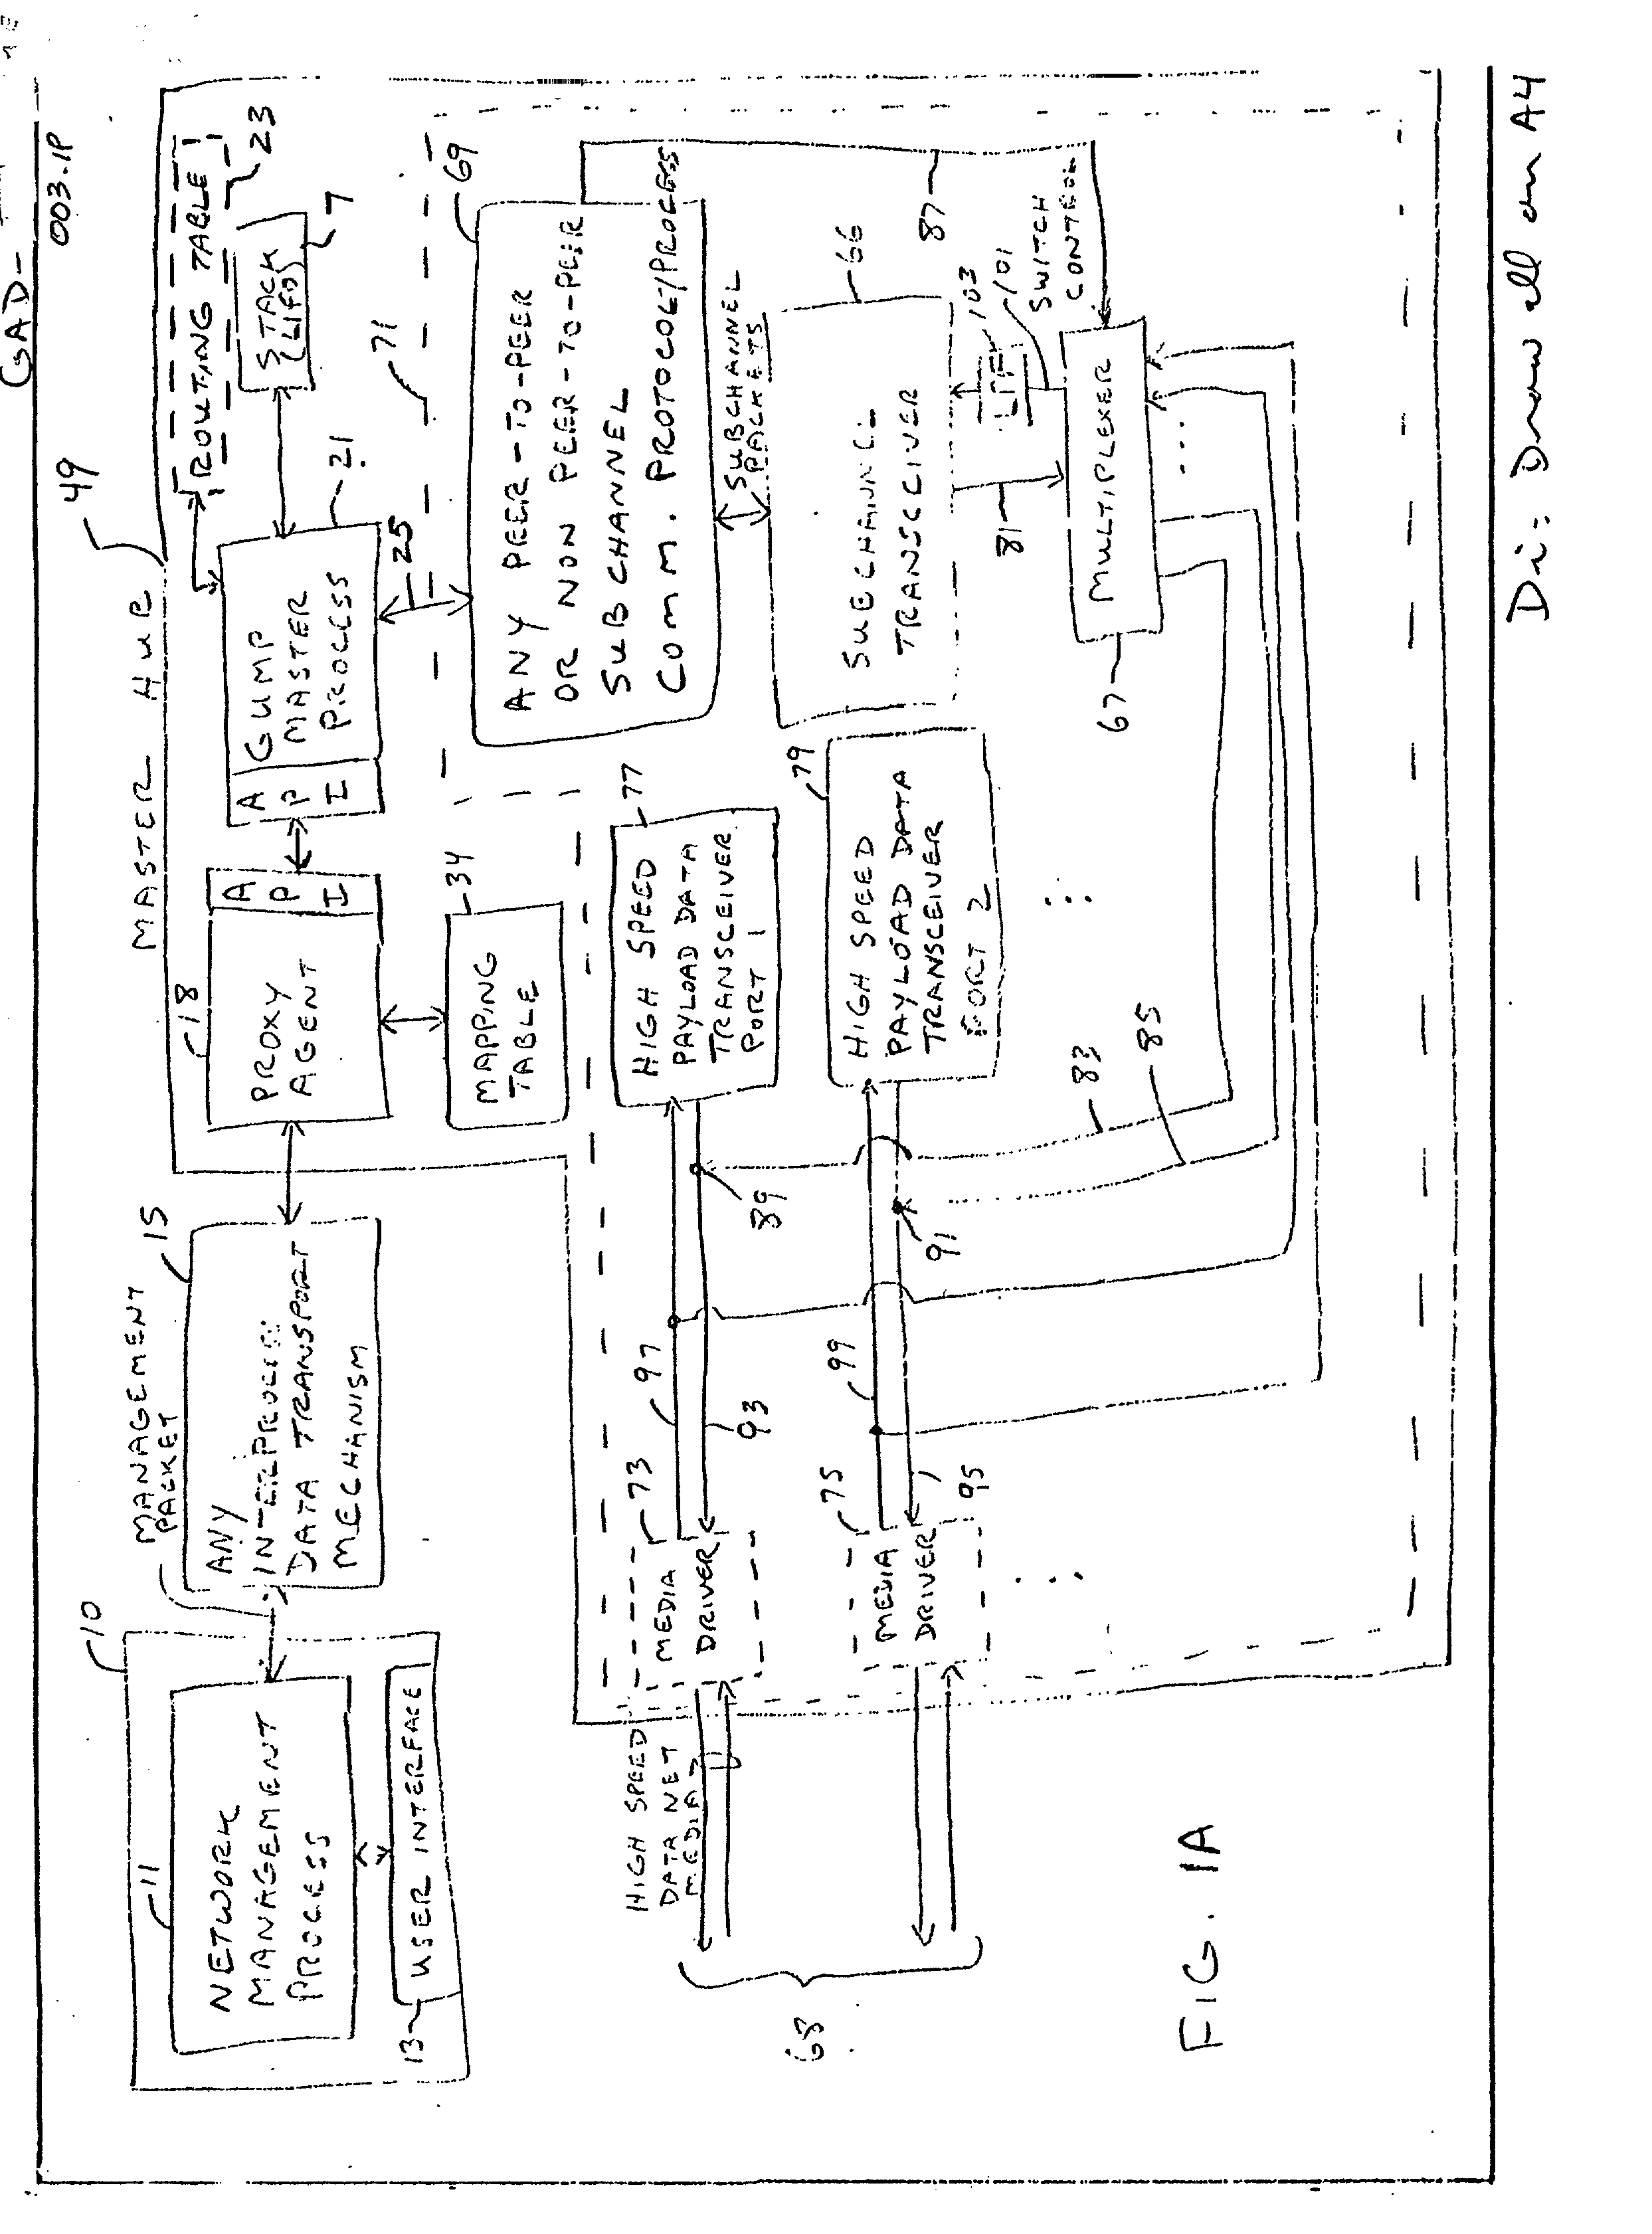 Apparatus and method for unilateral topology discovery in network management